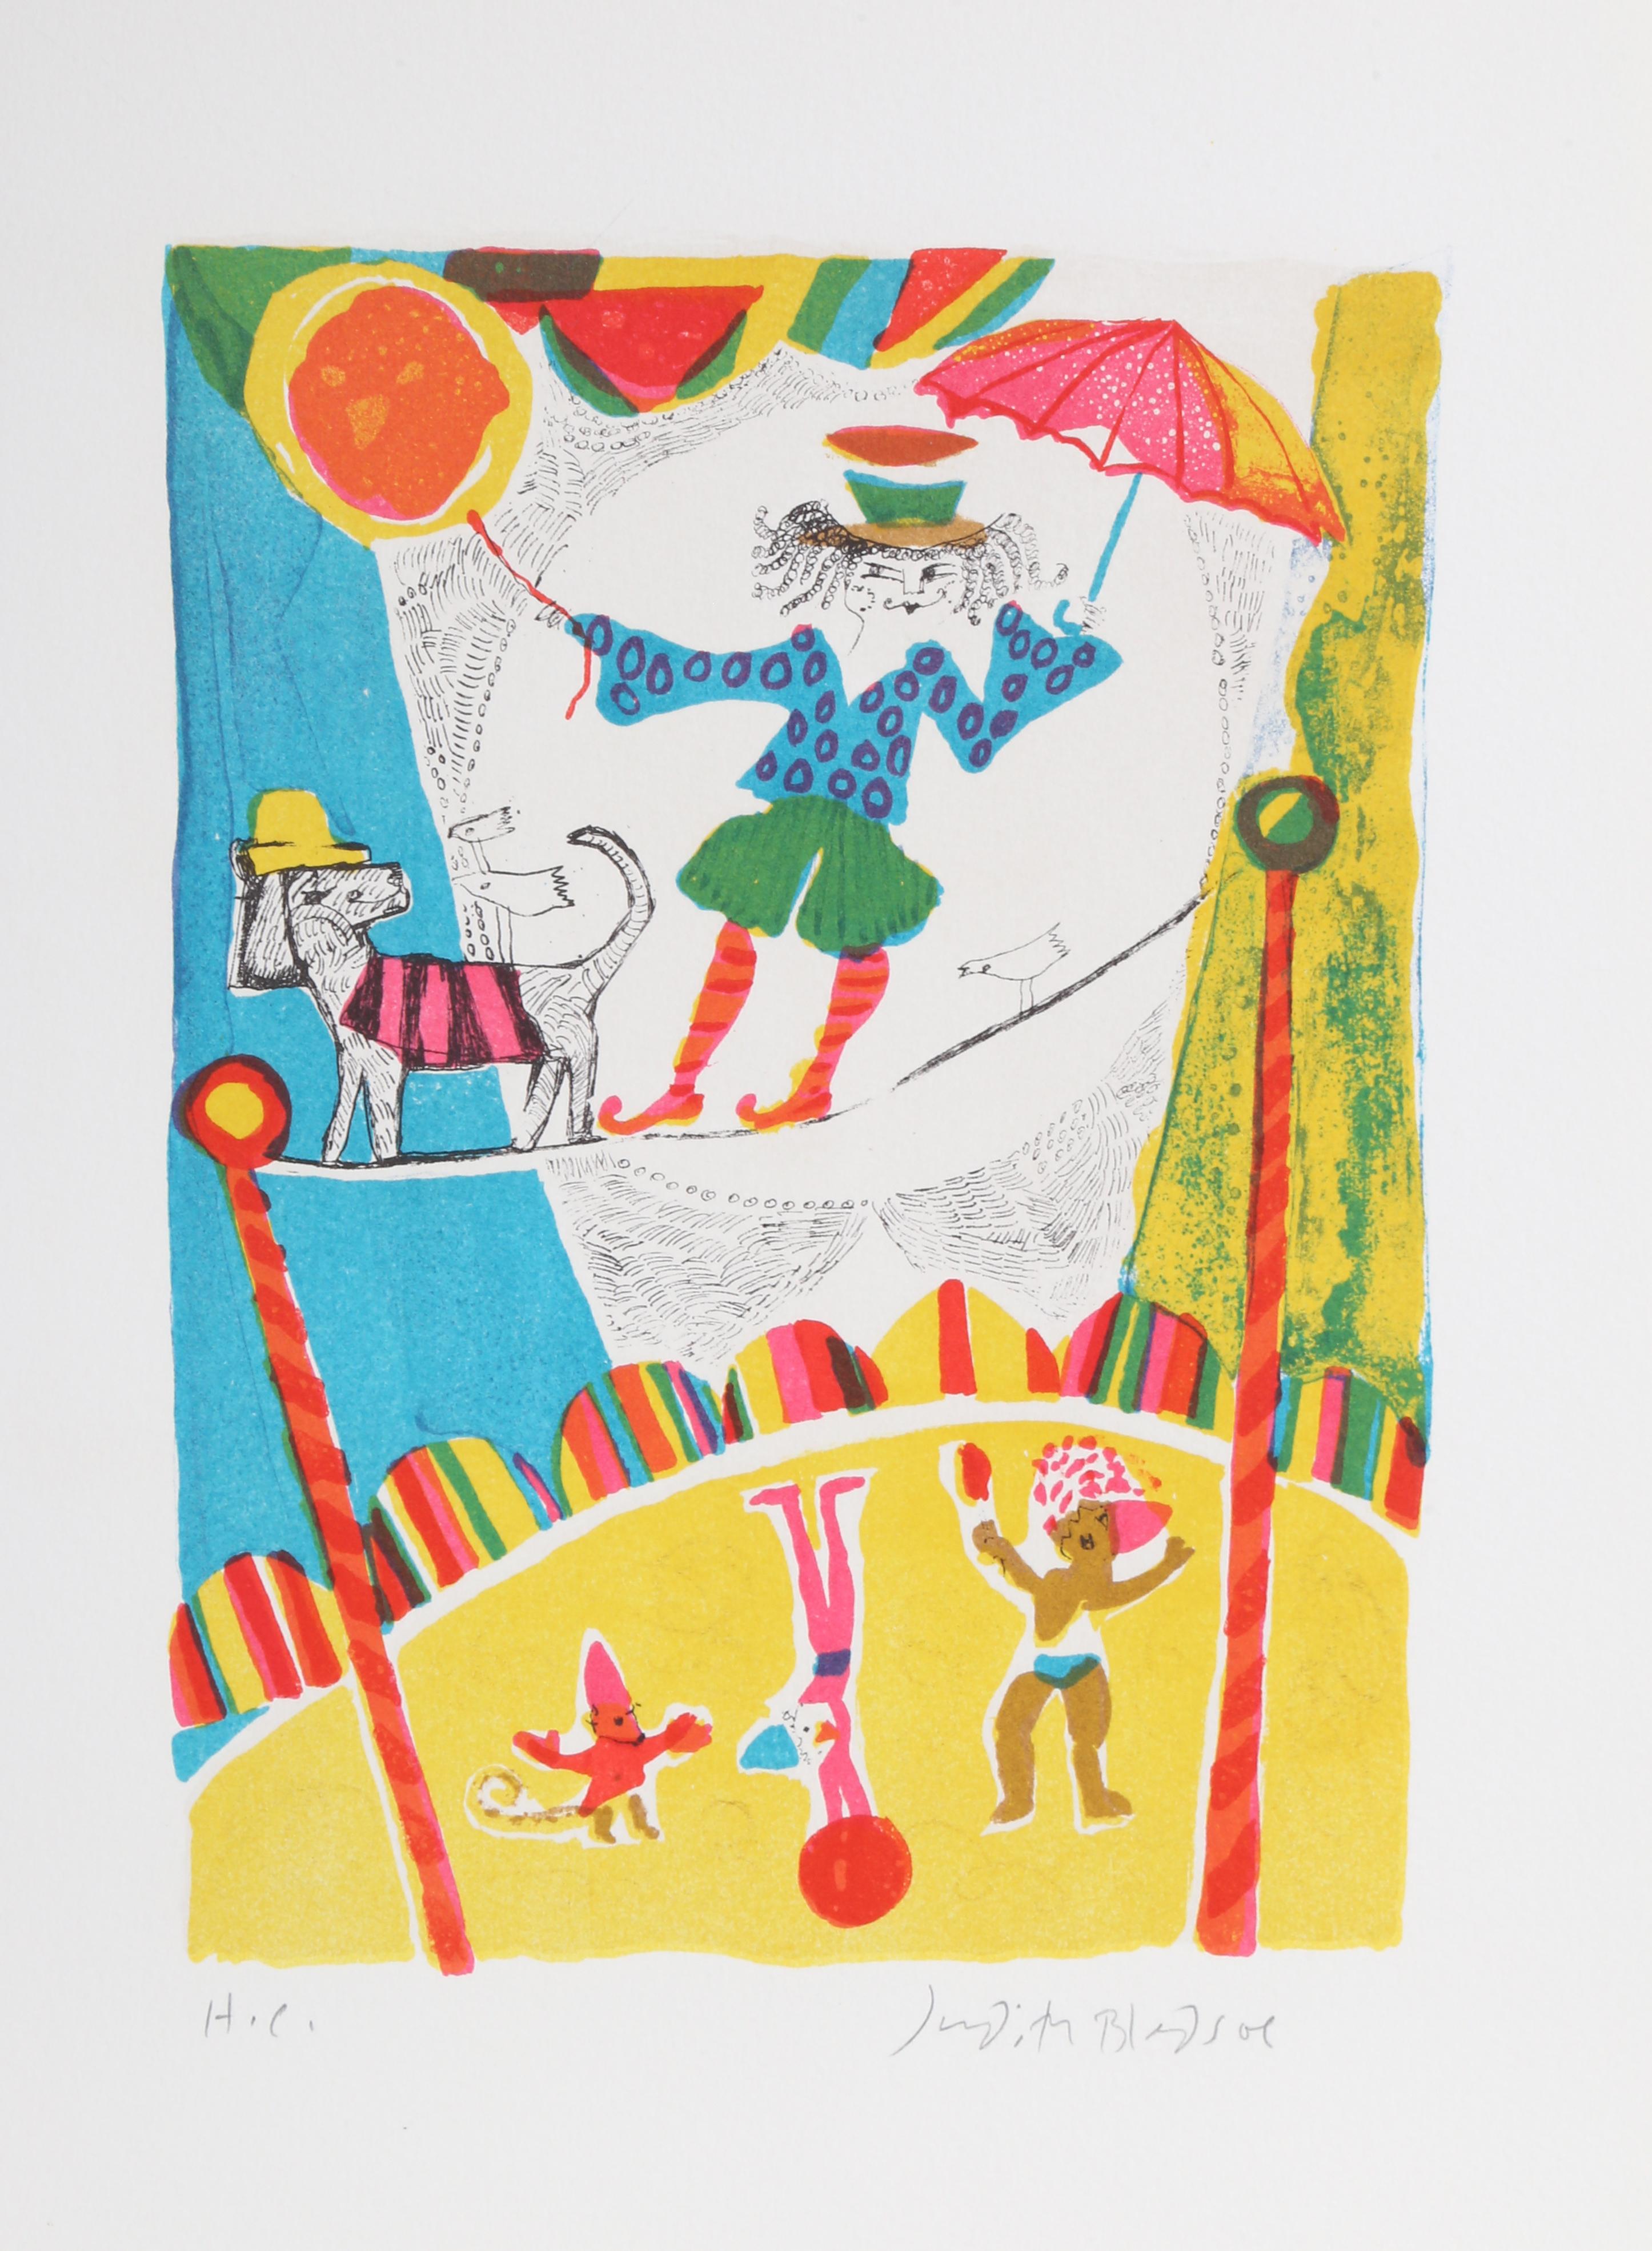 Judith Bledsoe, American (1938 - 2013) -  Tightrope Act from A Little Circus. Year: 1974, Medium: Lithograph, signed in pencil, Edition: HC, Size: 15  x 10.5 in. (38.1  x 26.67 cm), Description: Walking across the tightrope, the walker holds an